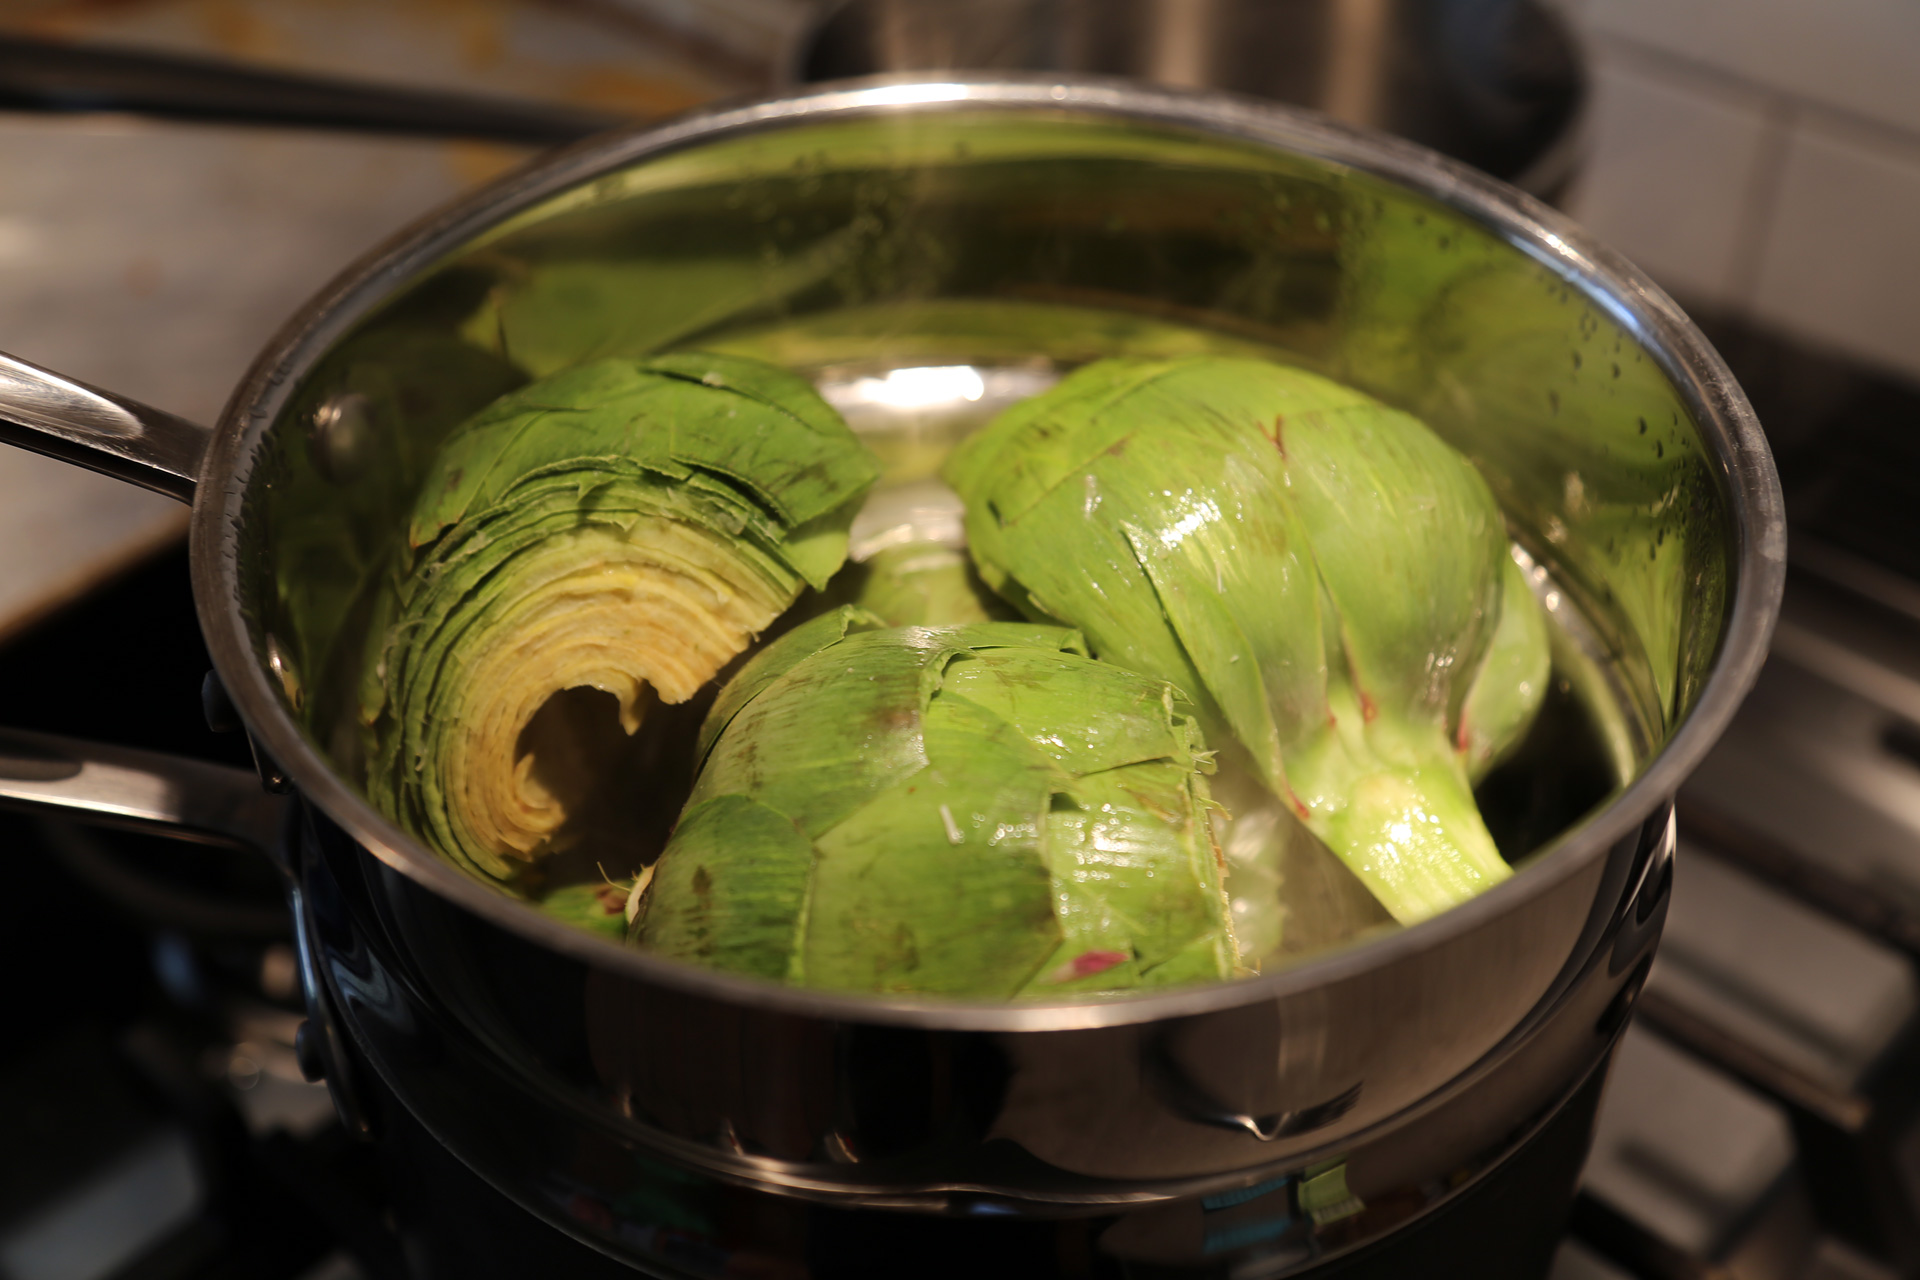 Fill a large pot with about 1 inch of water and fit with a steamer basket. Bring the water to a boil over high heat and add the artichoke halves, cut sides down.